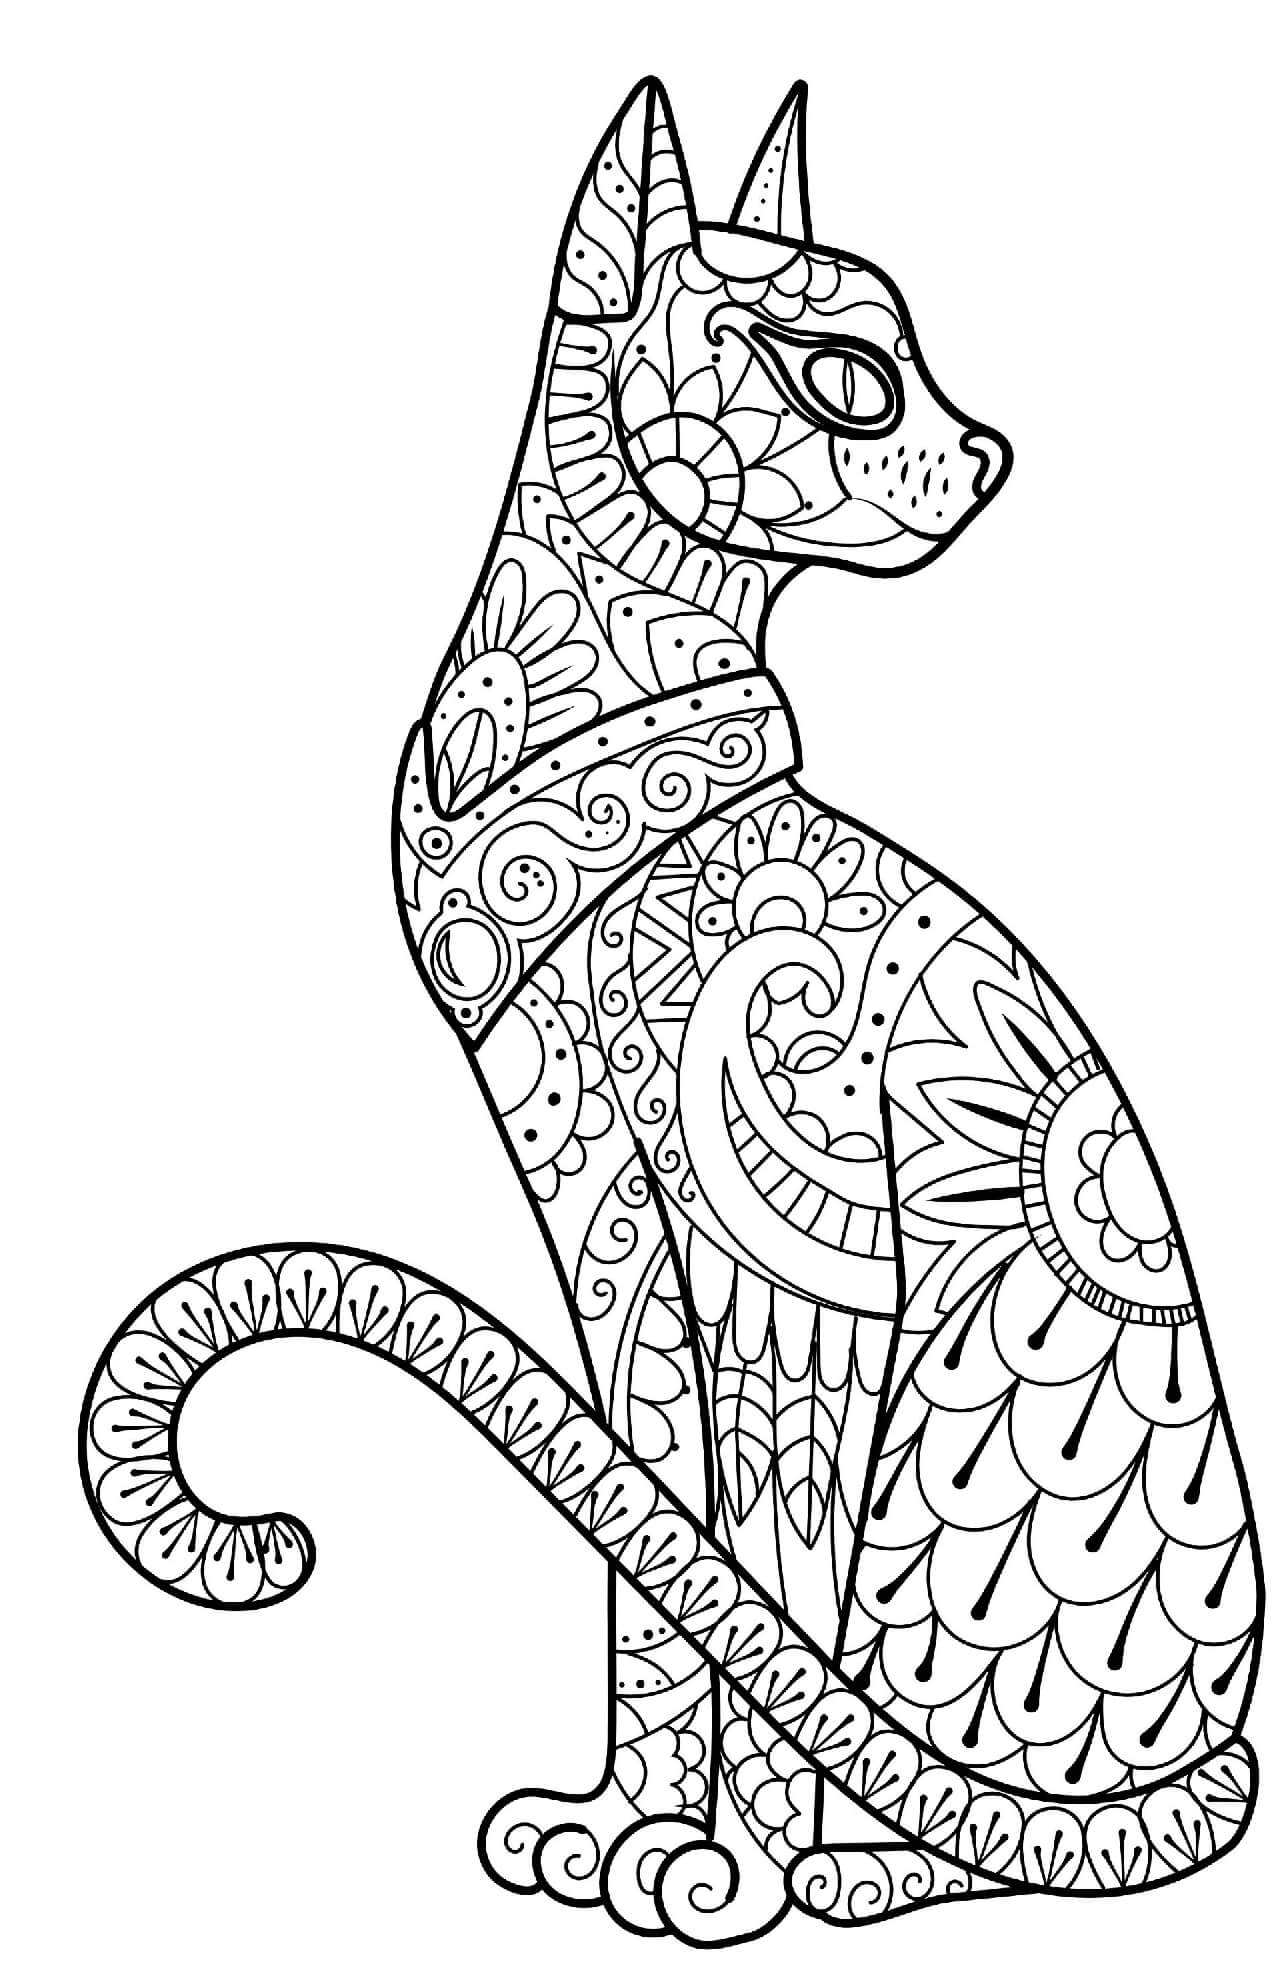 Halloween Intricate Cat Coloring Page